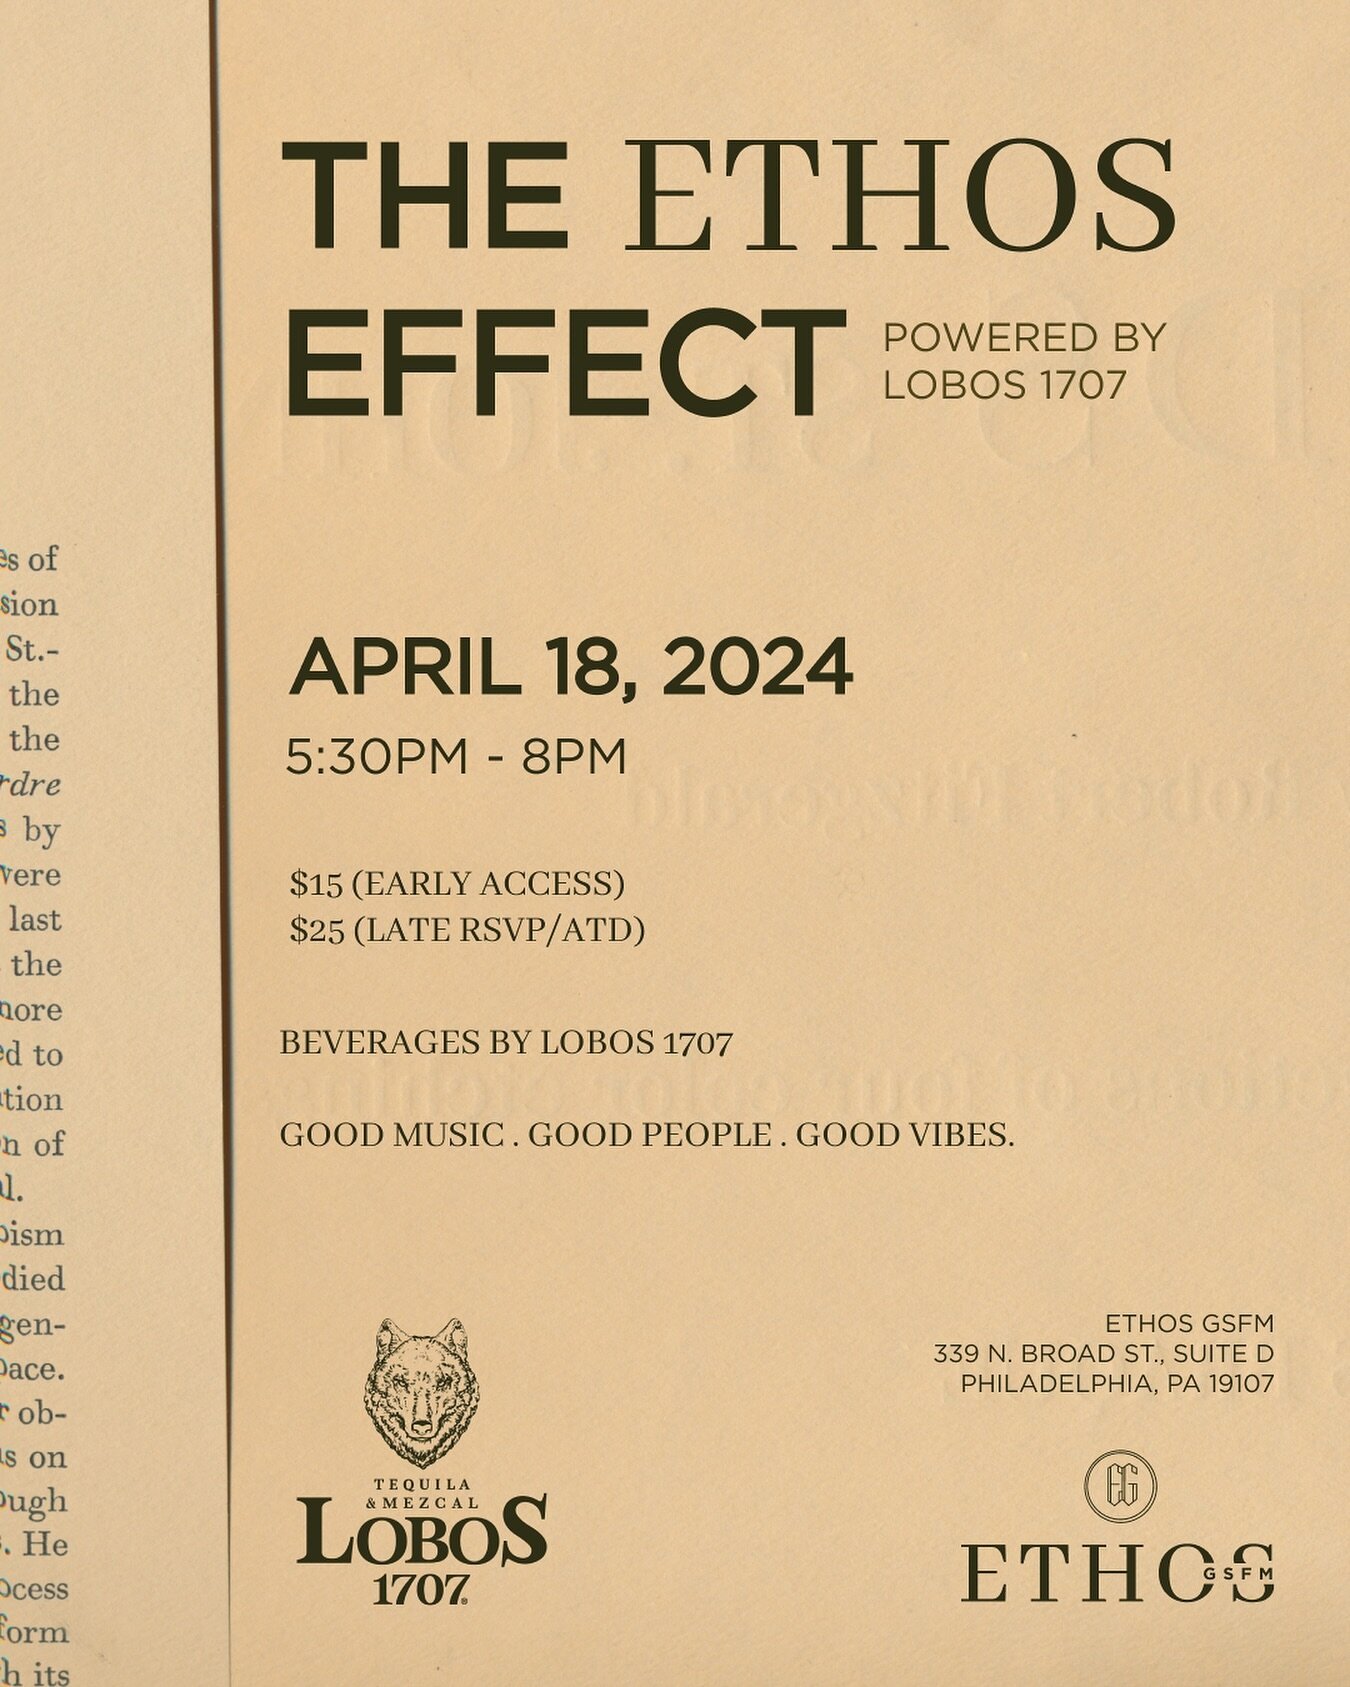 Join Us For The ETHOS Effect: Power by @Lobos1707 Tequila, Thursday April 18th (5:30pm to 8pm) #21+ 
.
Join us as we introduce the Award Winning Premium Tequila Brand @Lobos1707 to Philadelphia with an unparalleled voyage into the realm of refined br